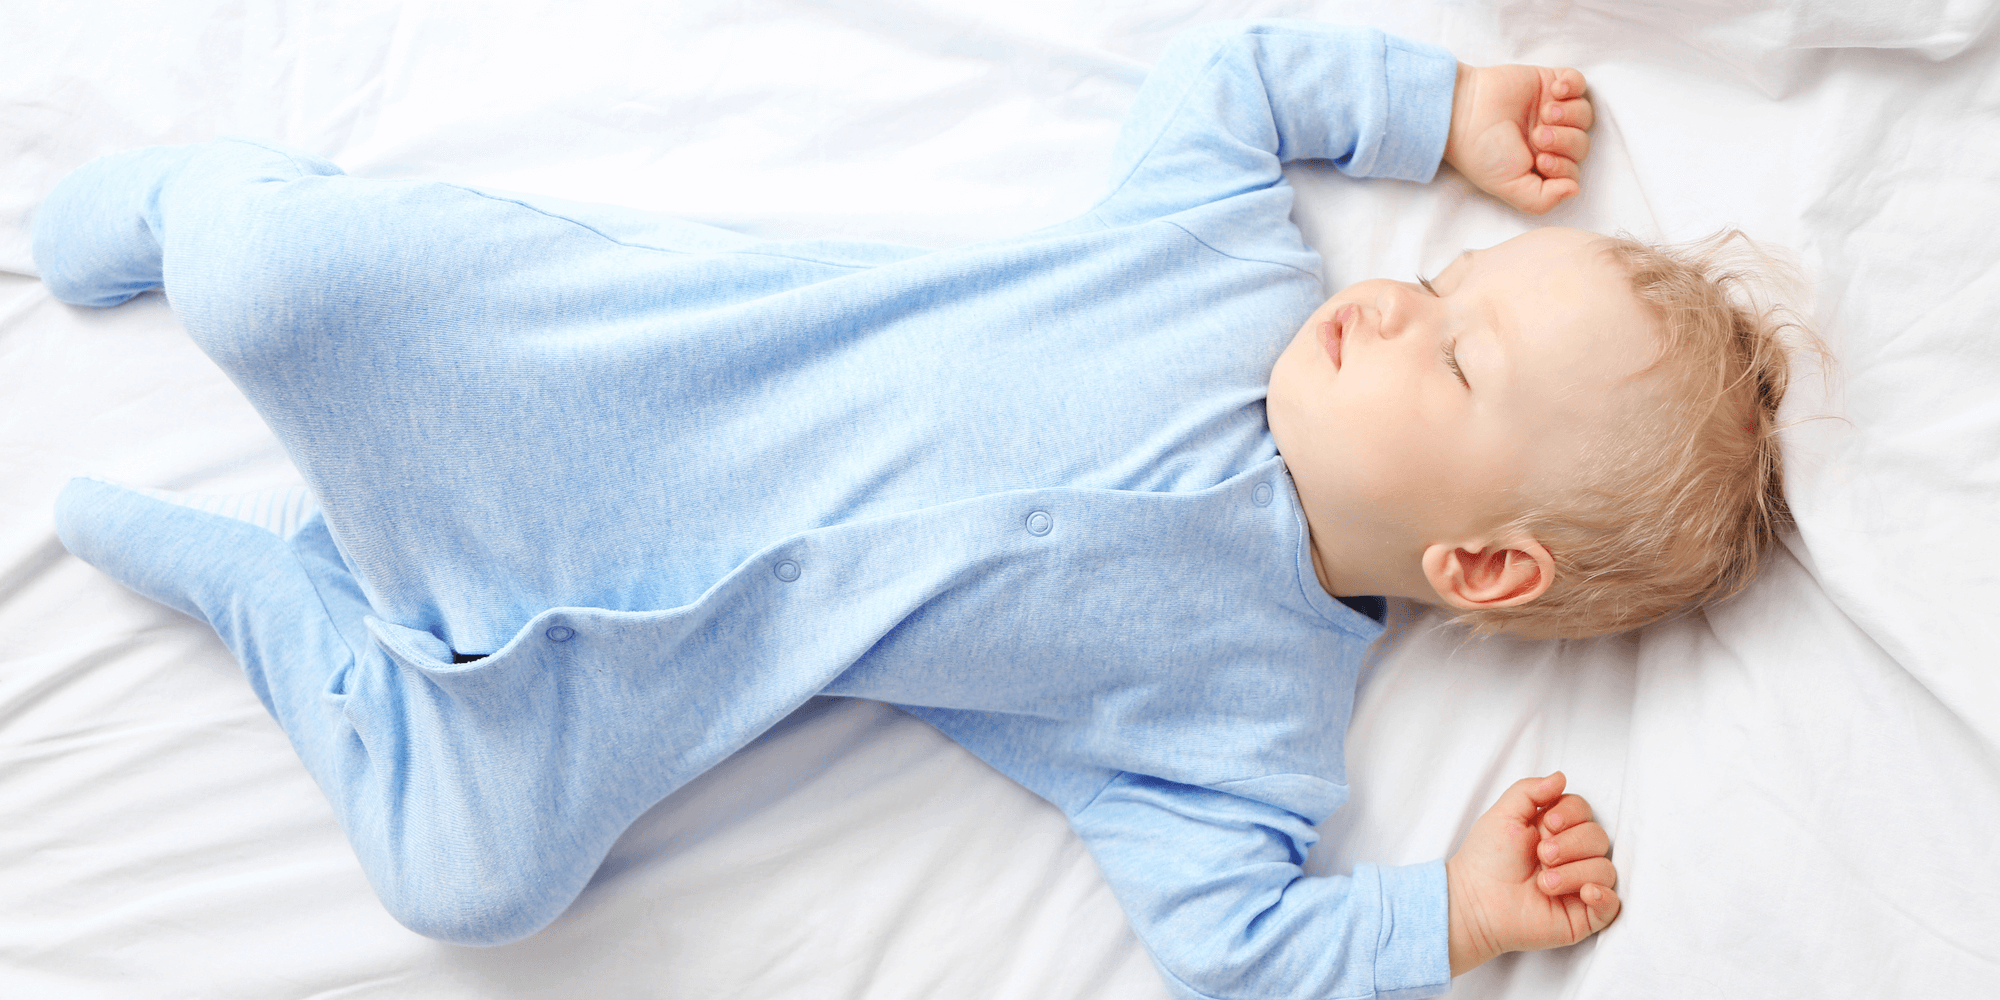 How to Dress Baby for Sleep - The Key to a Restful Night